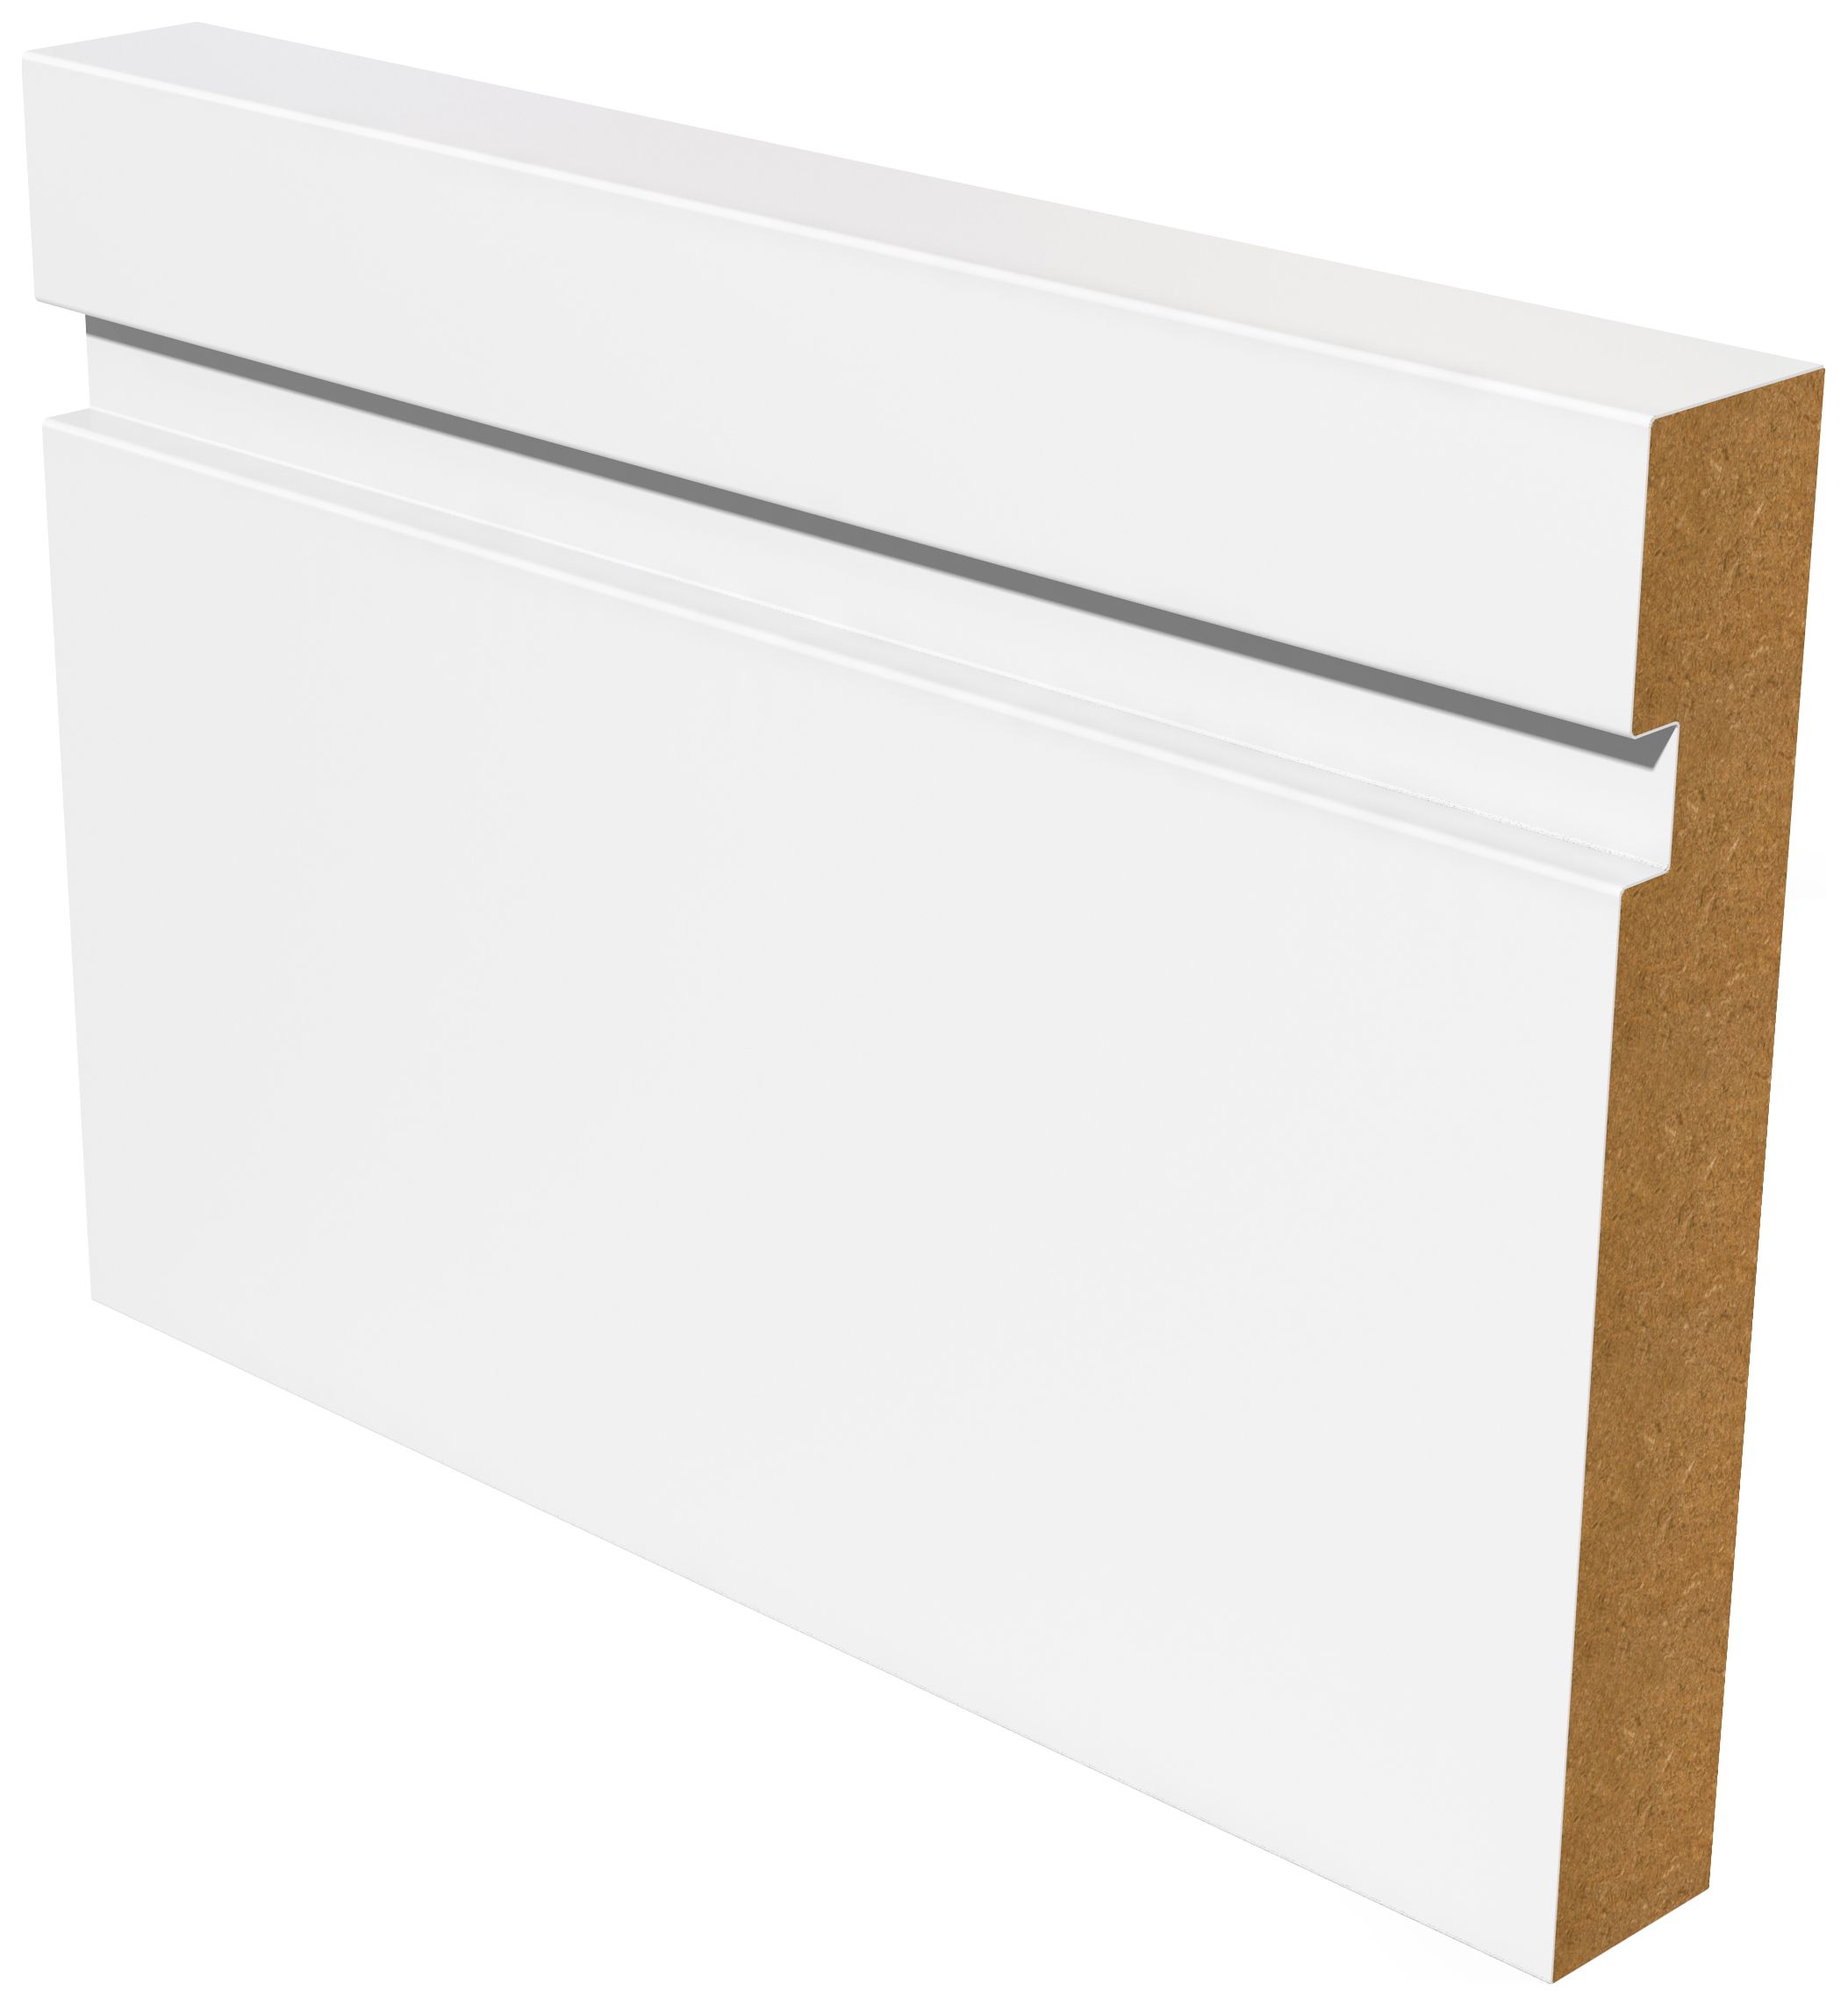 Image of Wickes Grooved Square Edge White MDF Skirting - 18 x 119 x 4200mm